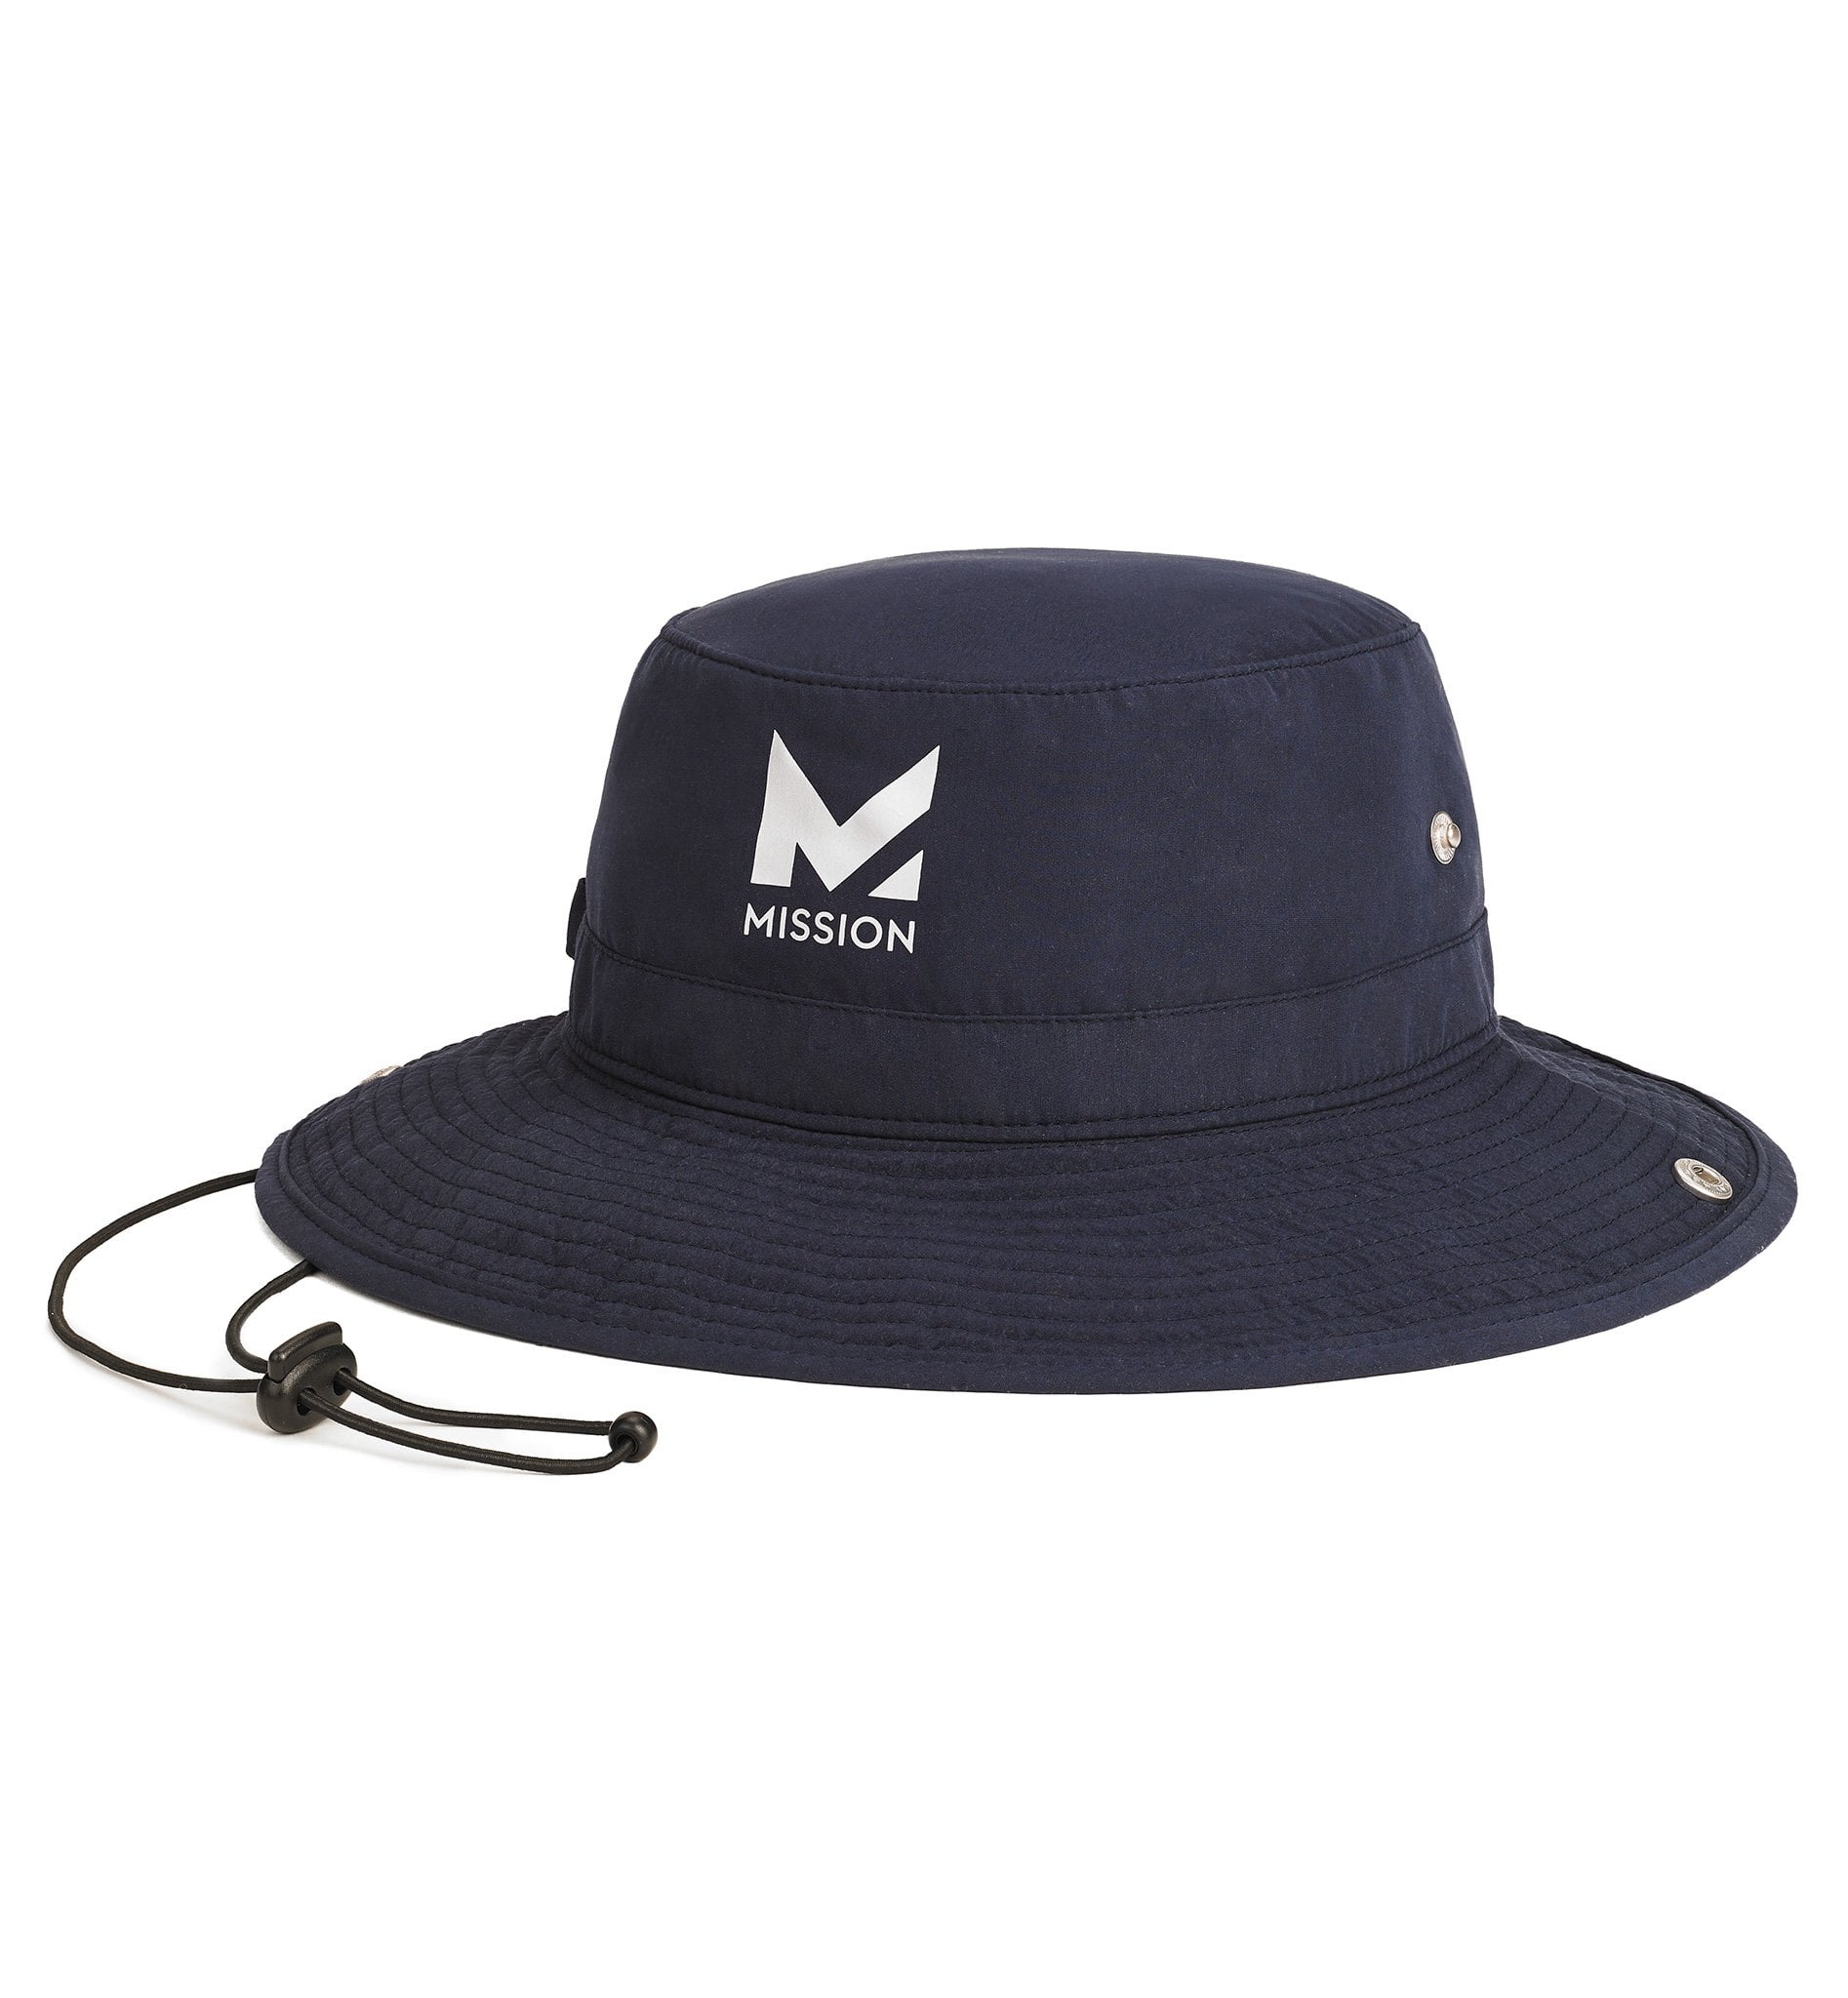 Mission Adult Unisex Cooling Bucket Hat, Evaporative Cooling Technology,  One Size, Navy 